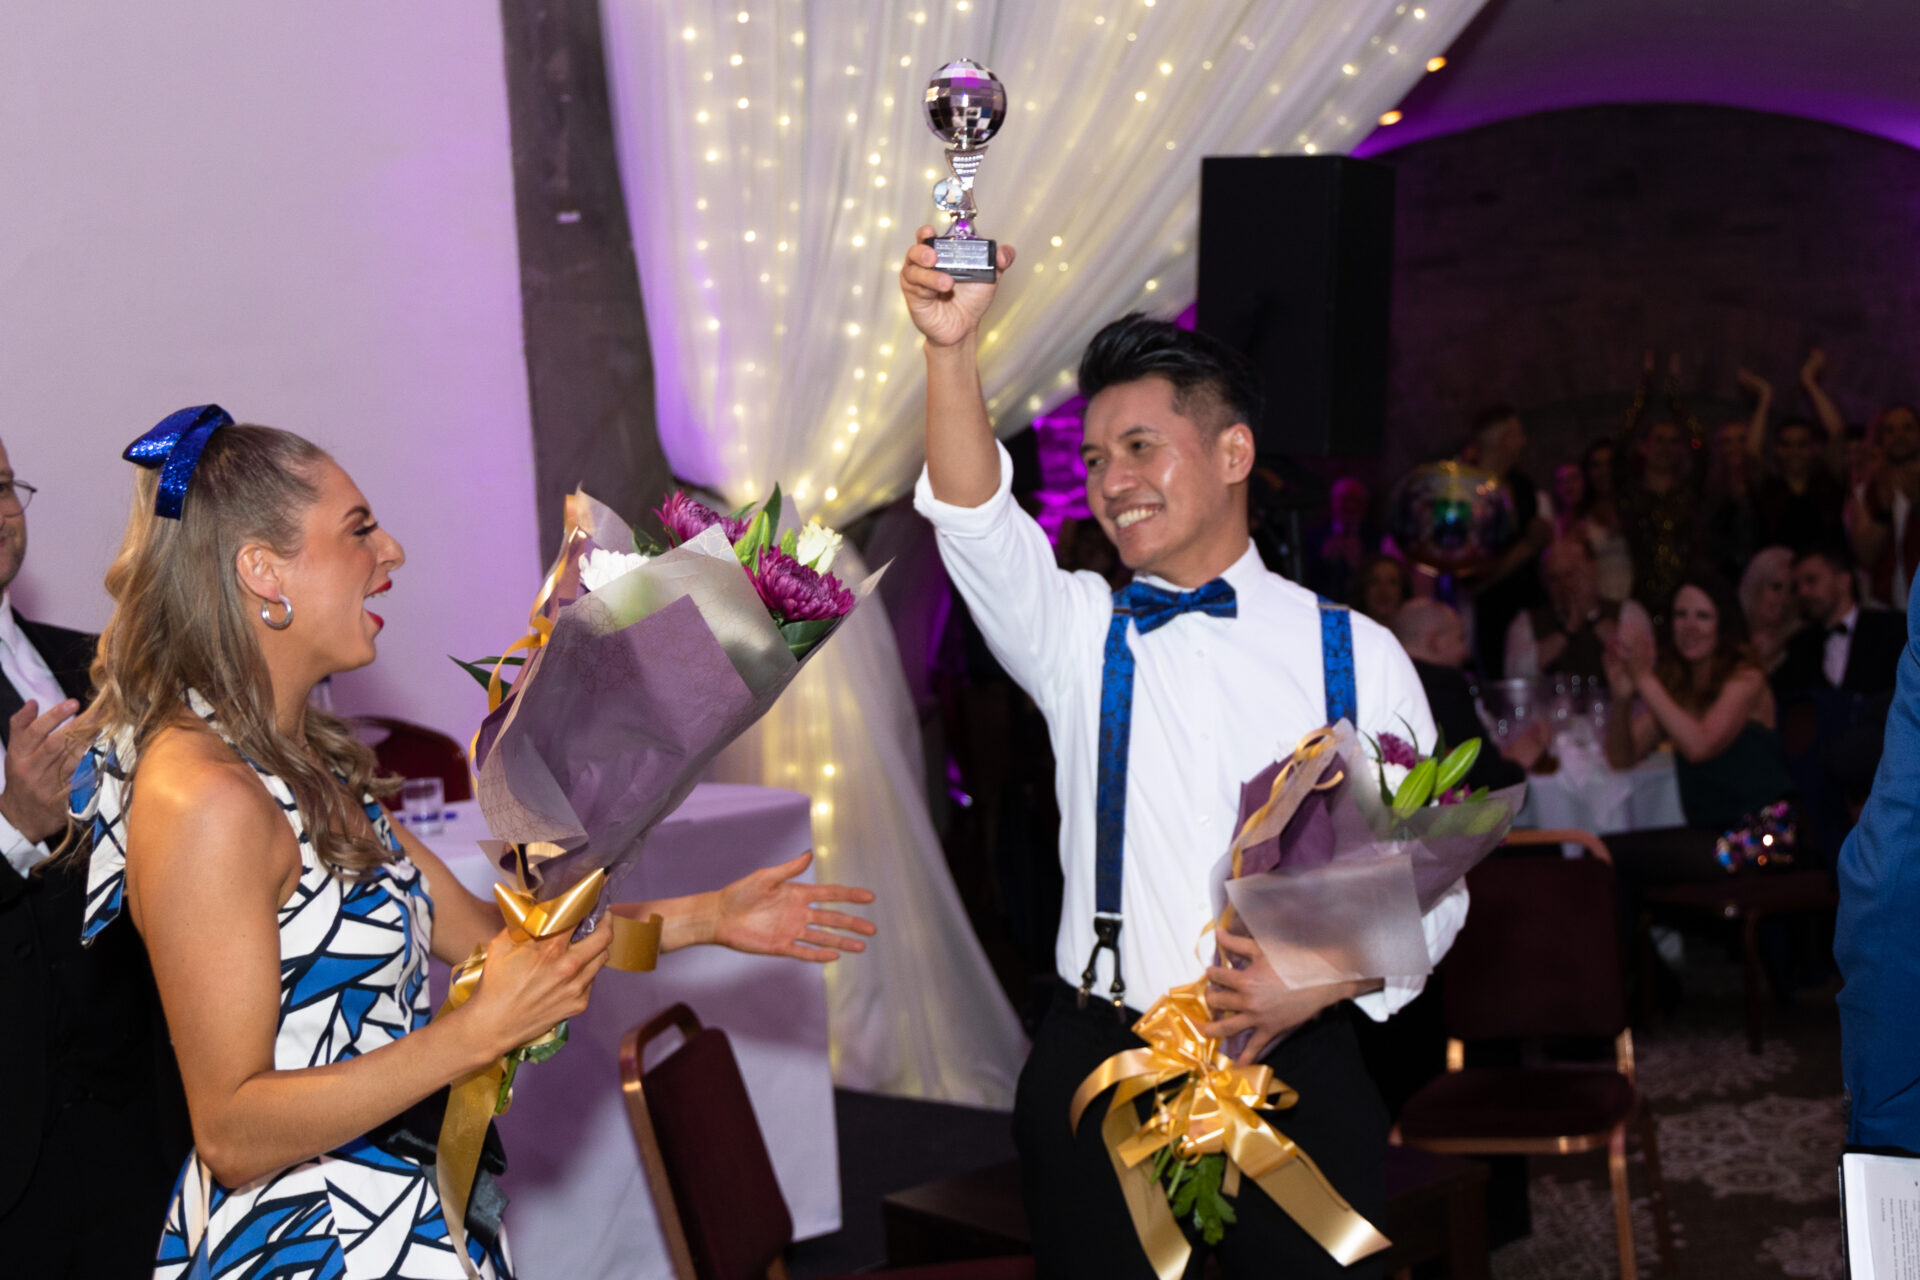 Person holding trophy in the air with other person holding flowers after winning a dance competition